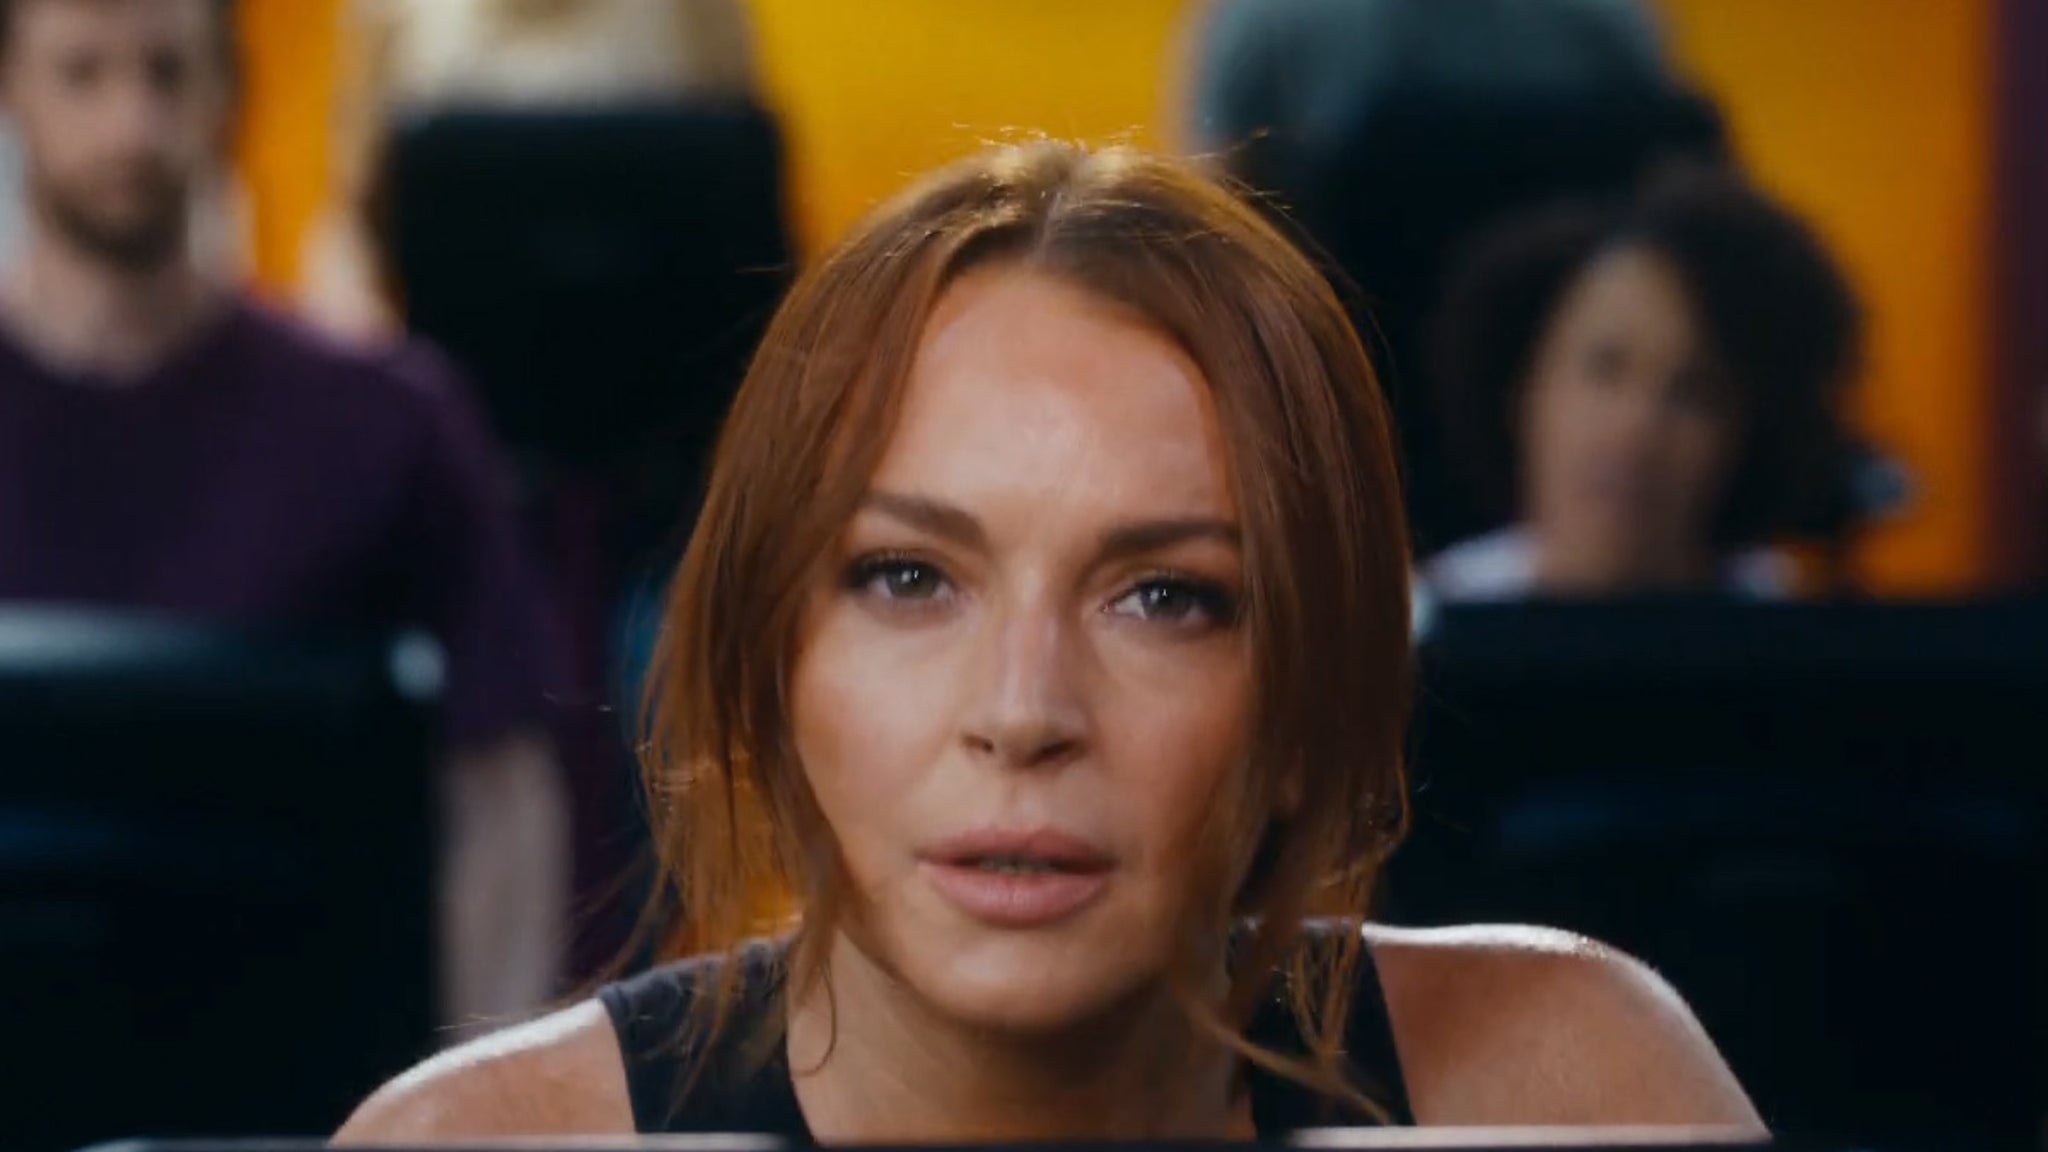 Lindsay Lohan Super Bowl Planet Fitness Ad Shows Exercise Cures All – TMZ